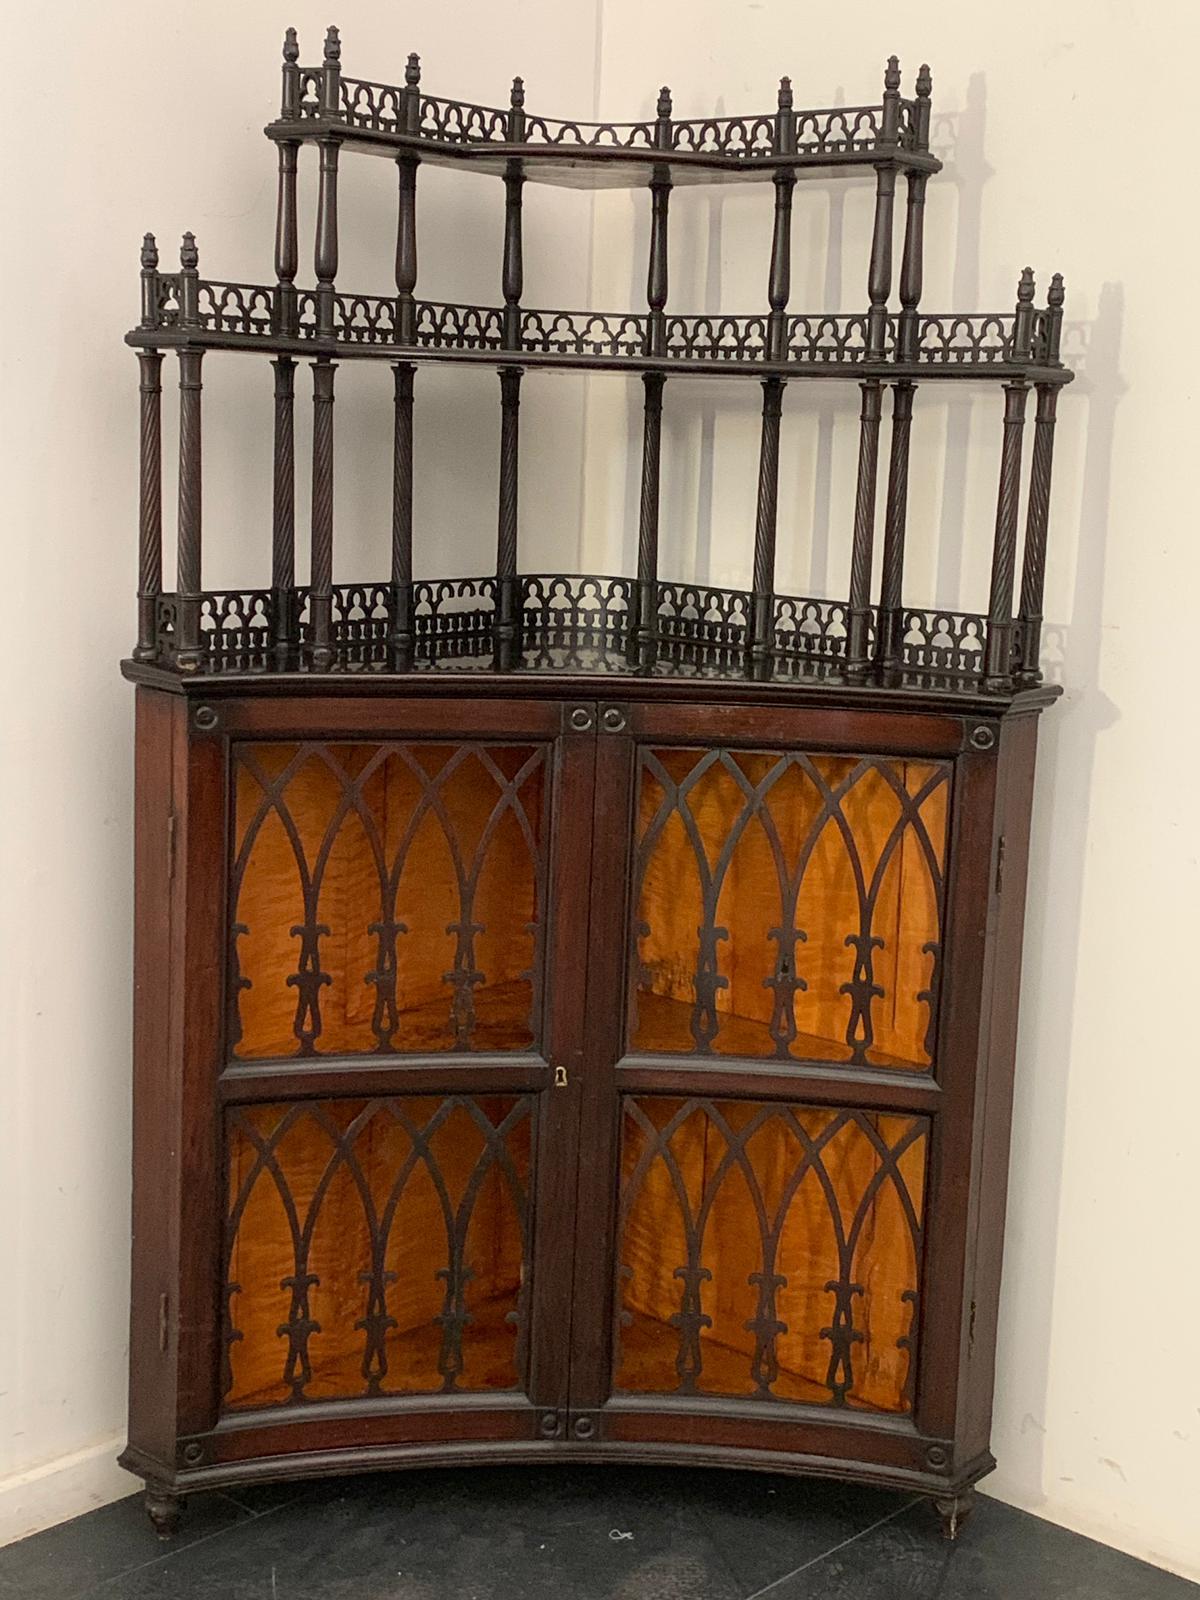 Corner cupboard with riser and two concave openwork doors with Gothic arches in the base. The ebony veneer top has an elevation with shaped shelves, finely carved rosewood columns and openwork arched railing. Maple veneered interior. Neo-Gothic